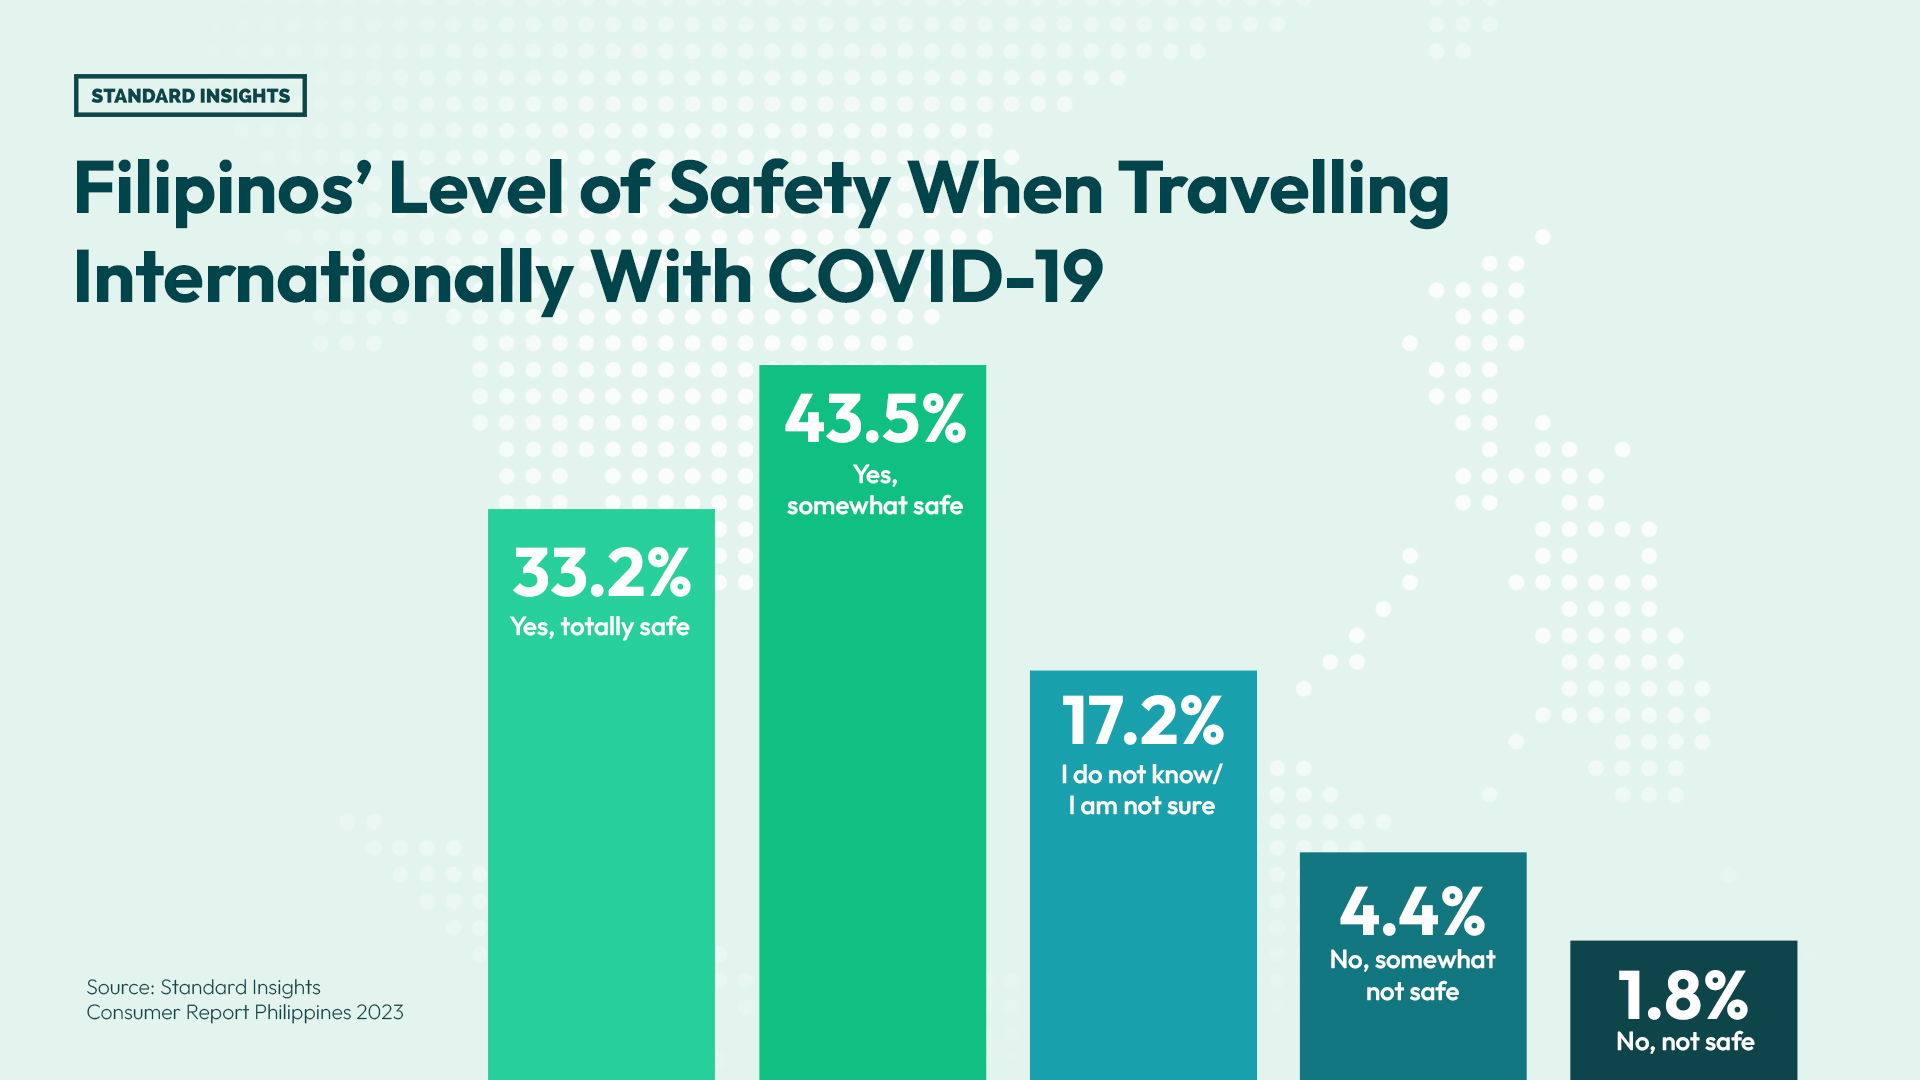 Standard Insights' survey results revealing Filipinos' level of safety when travelling internationally with COVID-19